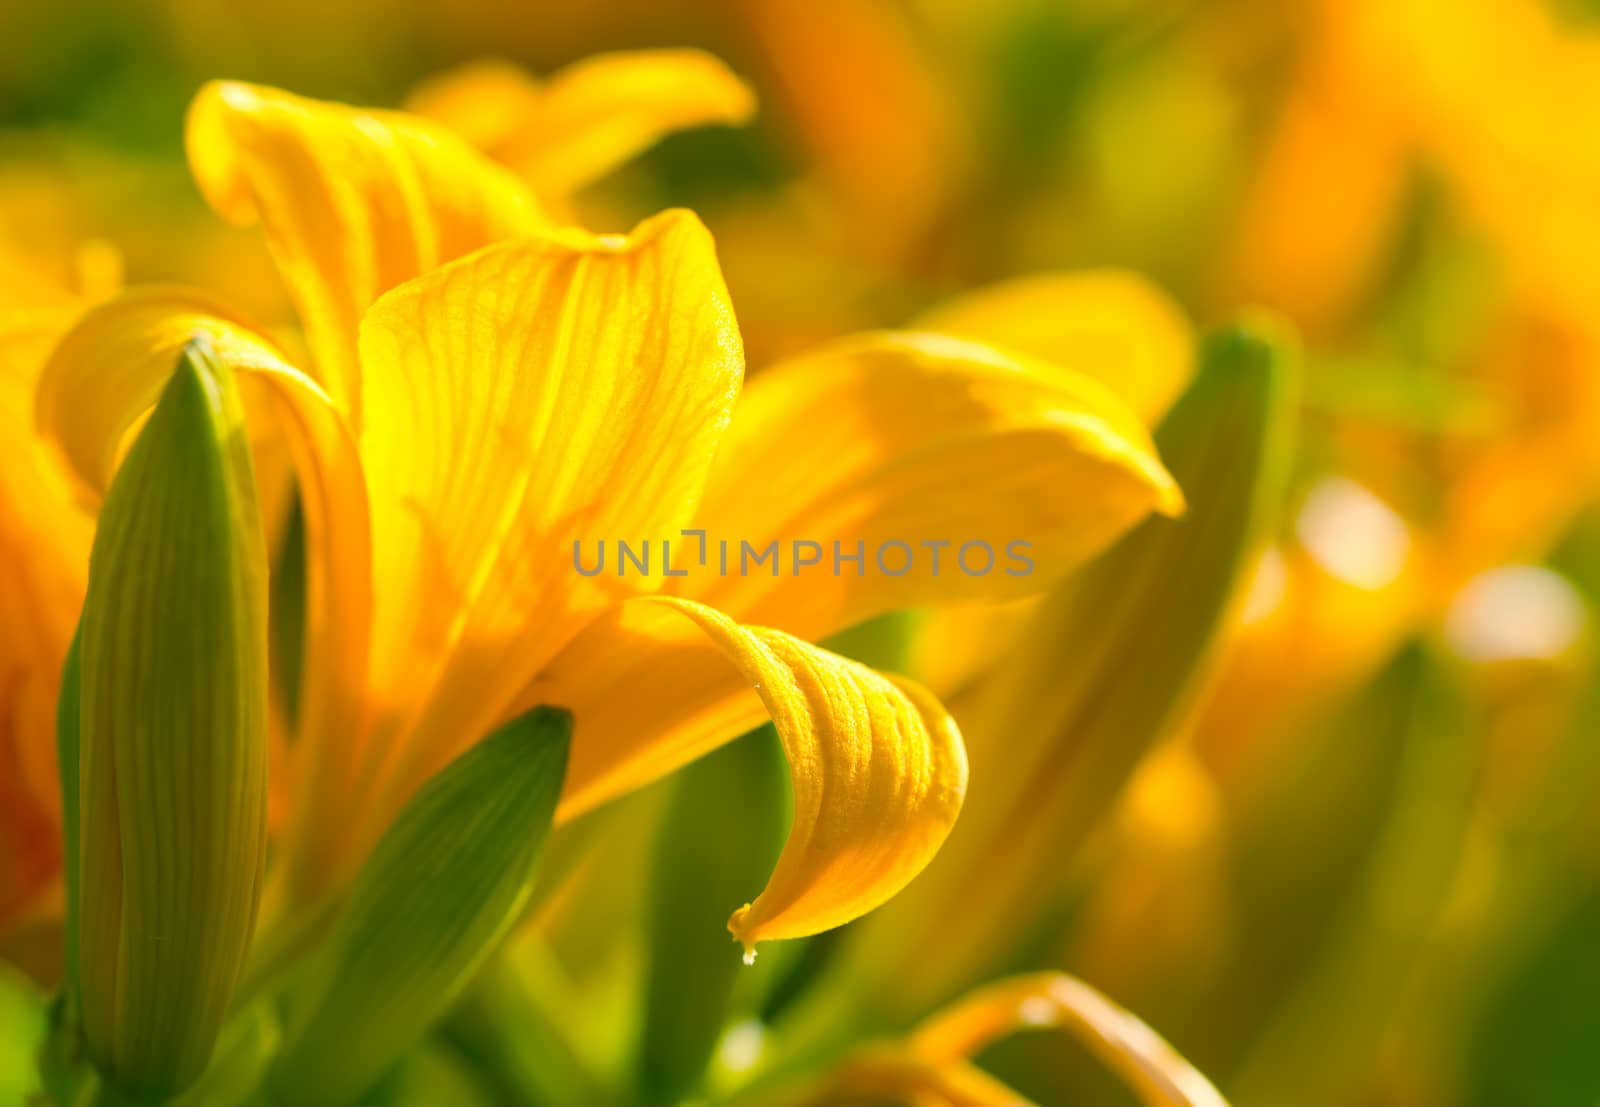 Lily flowers, yellow on green background